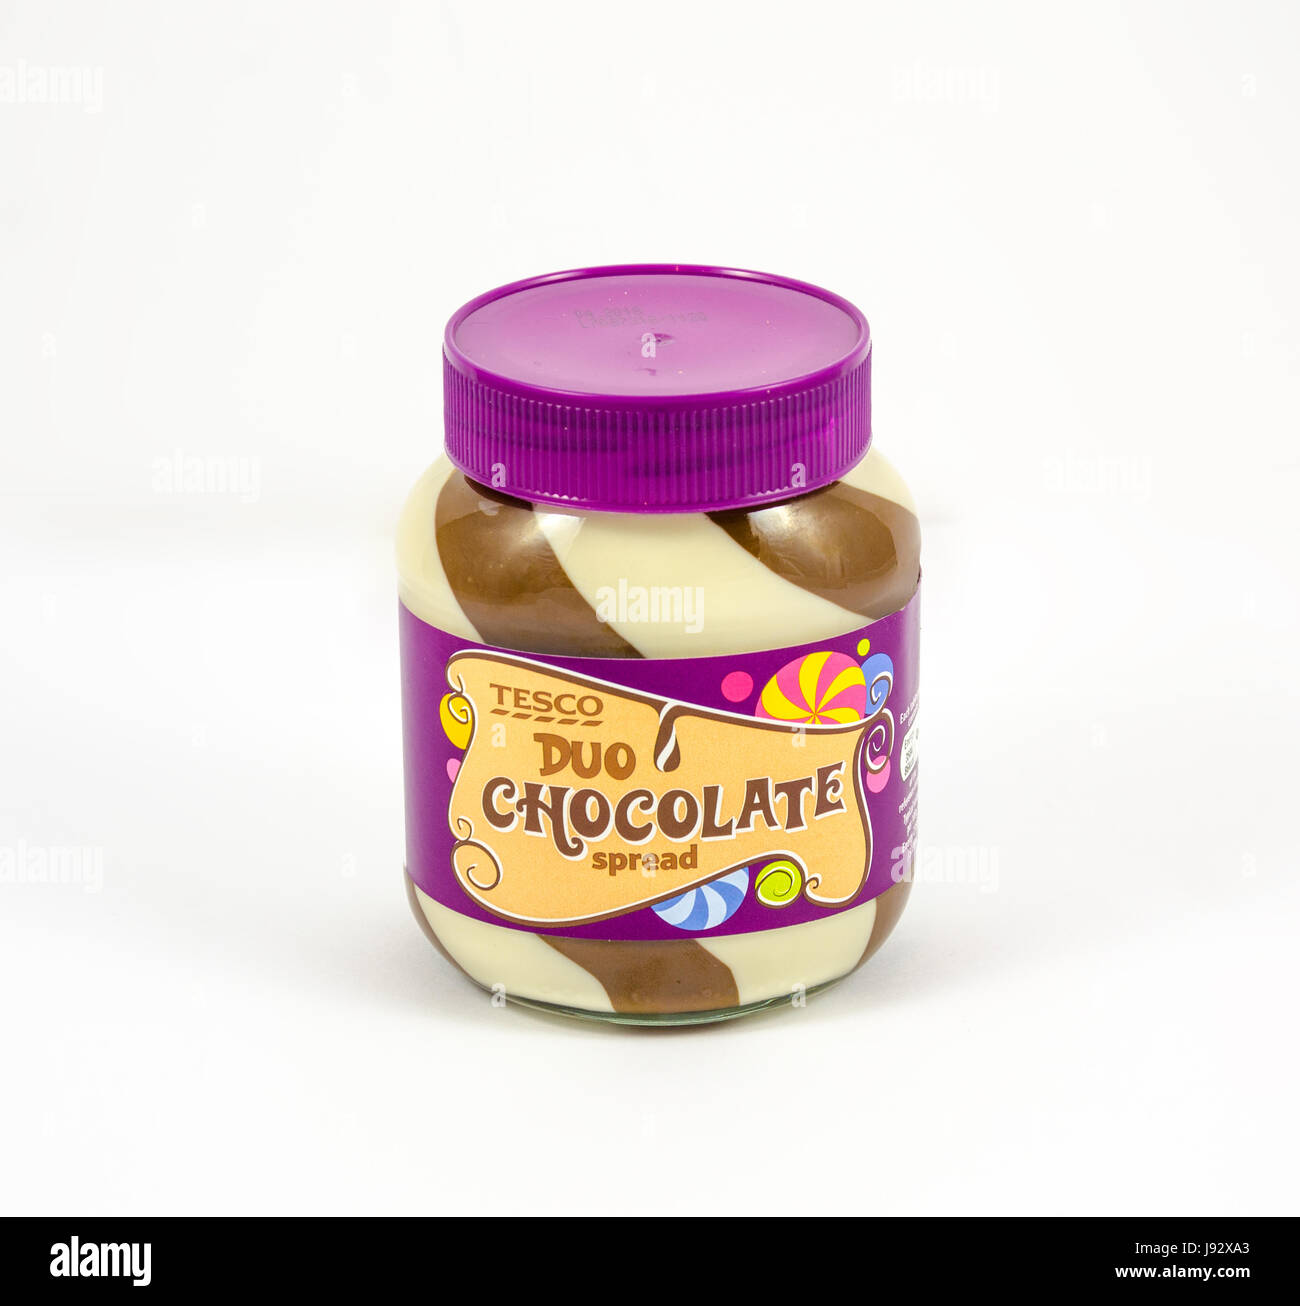 Download A Jar Of Tesco Duo Chocolate Spread Isolated On A White Background Stock Photo Alamy Yellowimages Mockups